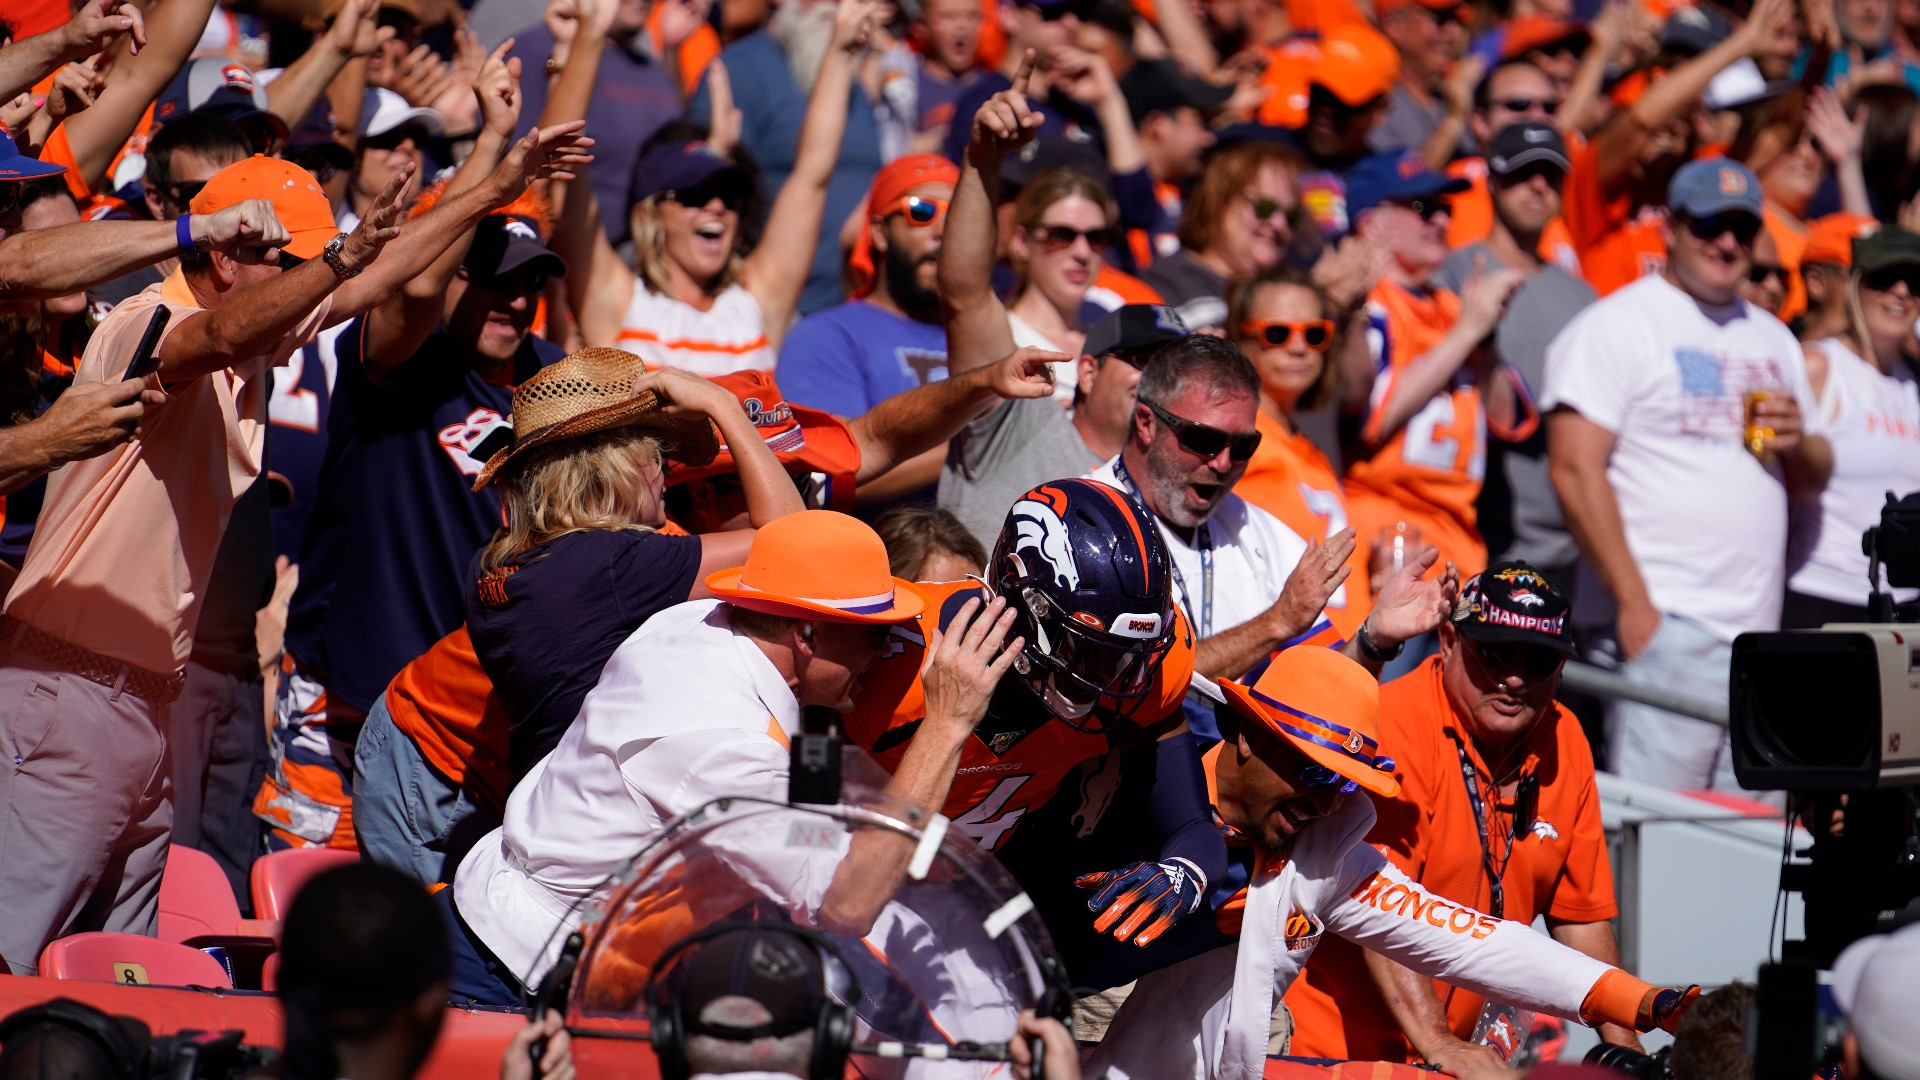 After missing playoffs again, Broncos don't raise ticket prices for